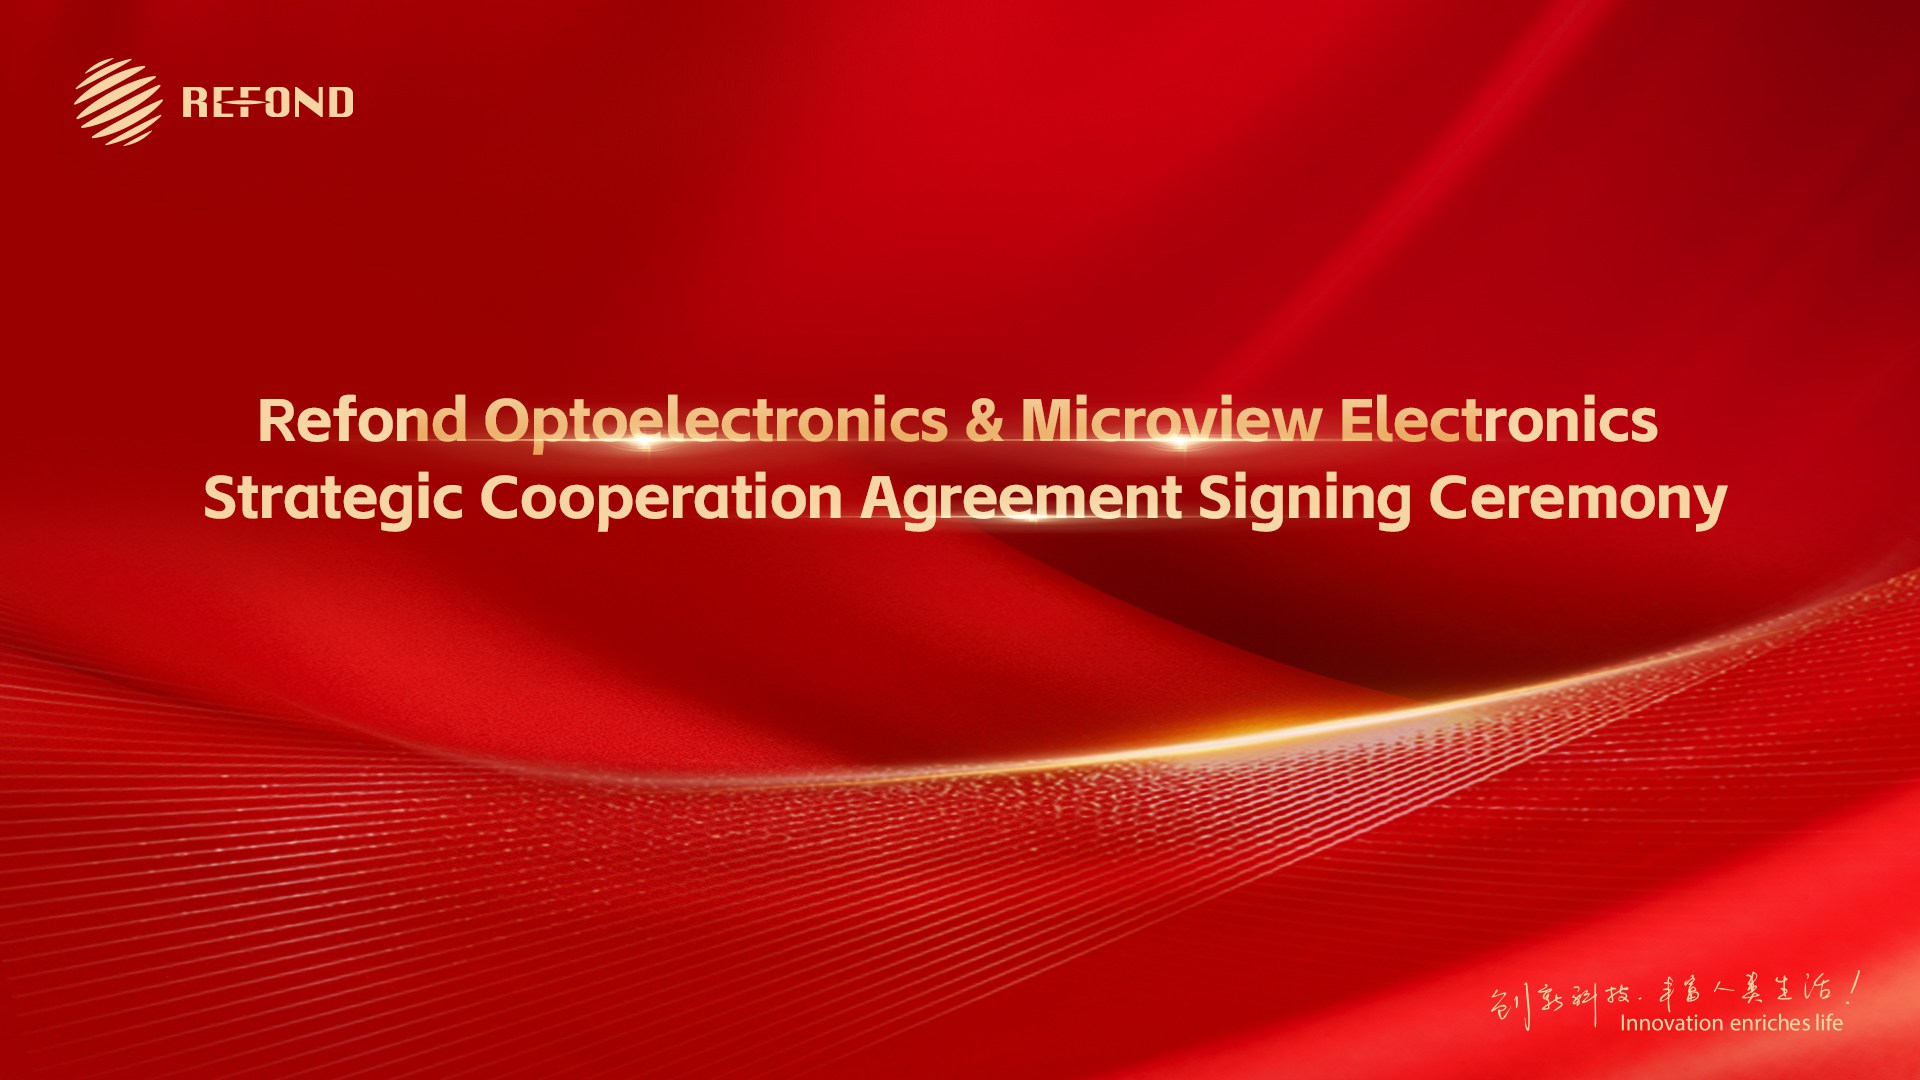 Powerful Alliance | Refond Optoelectronics and Microview Electronics Form Strategic Partnership